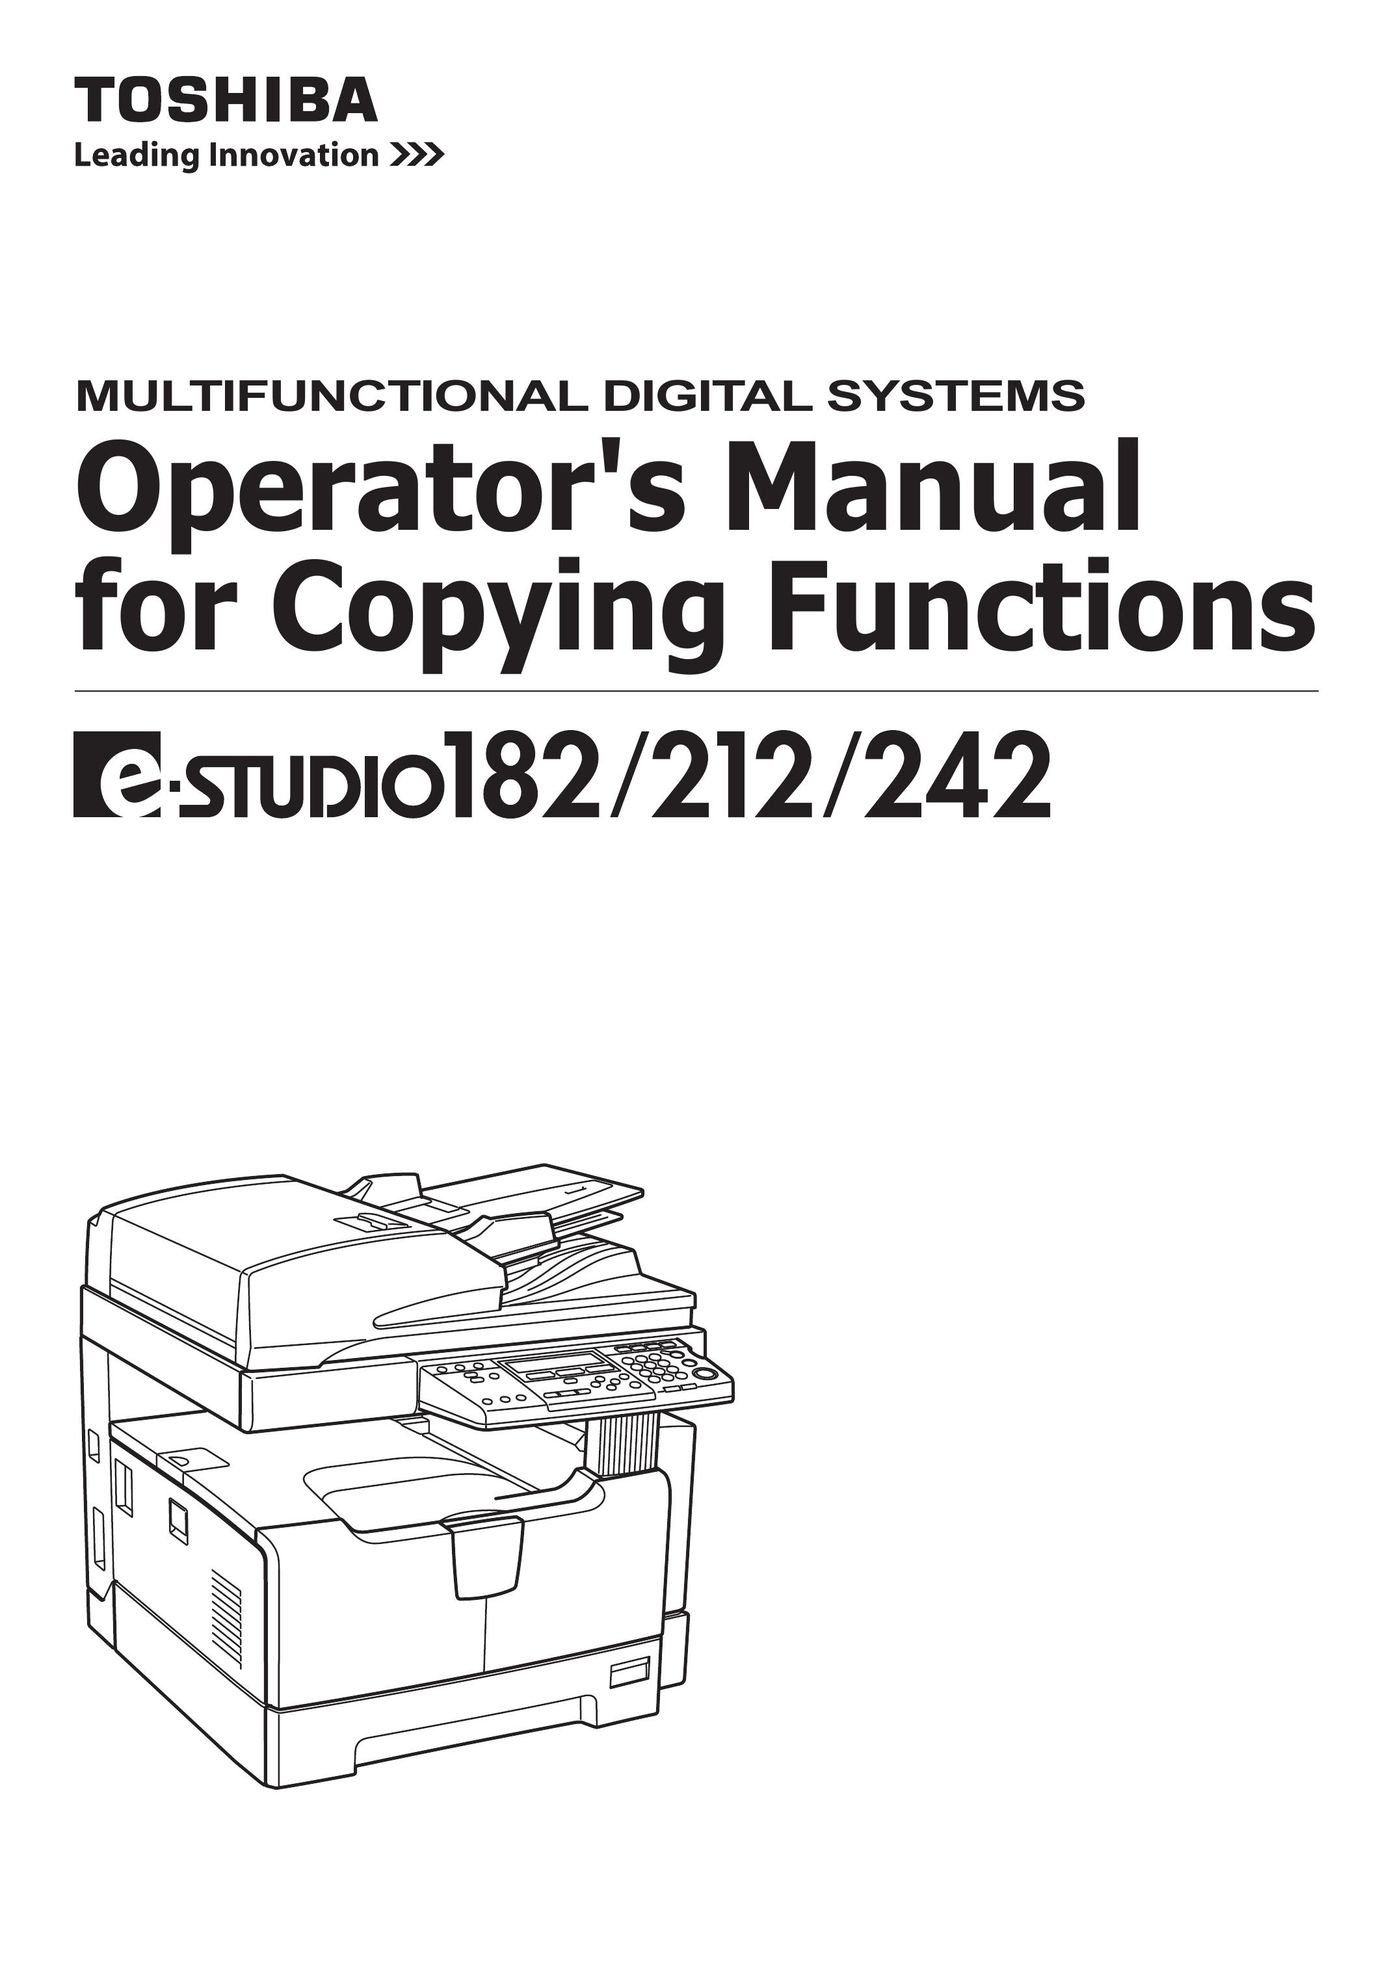 Toshiba 212 All in One Printer User Manual